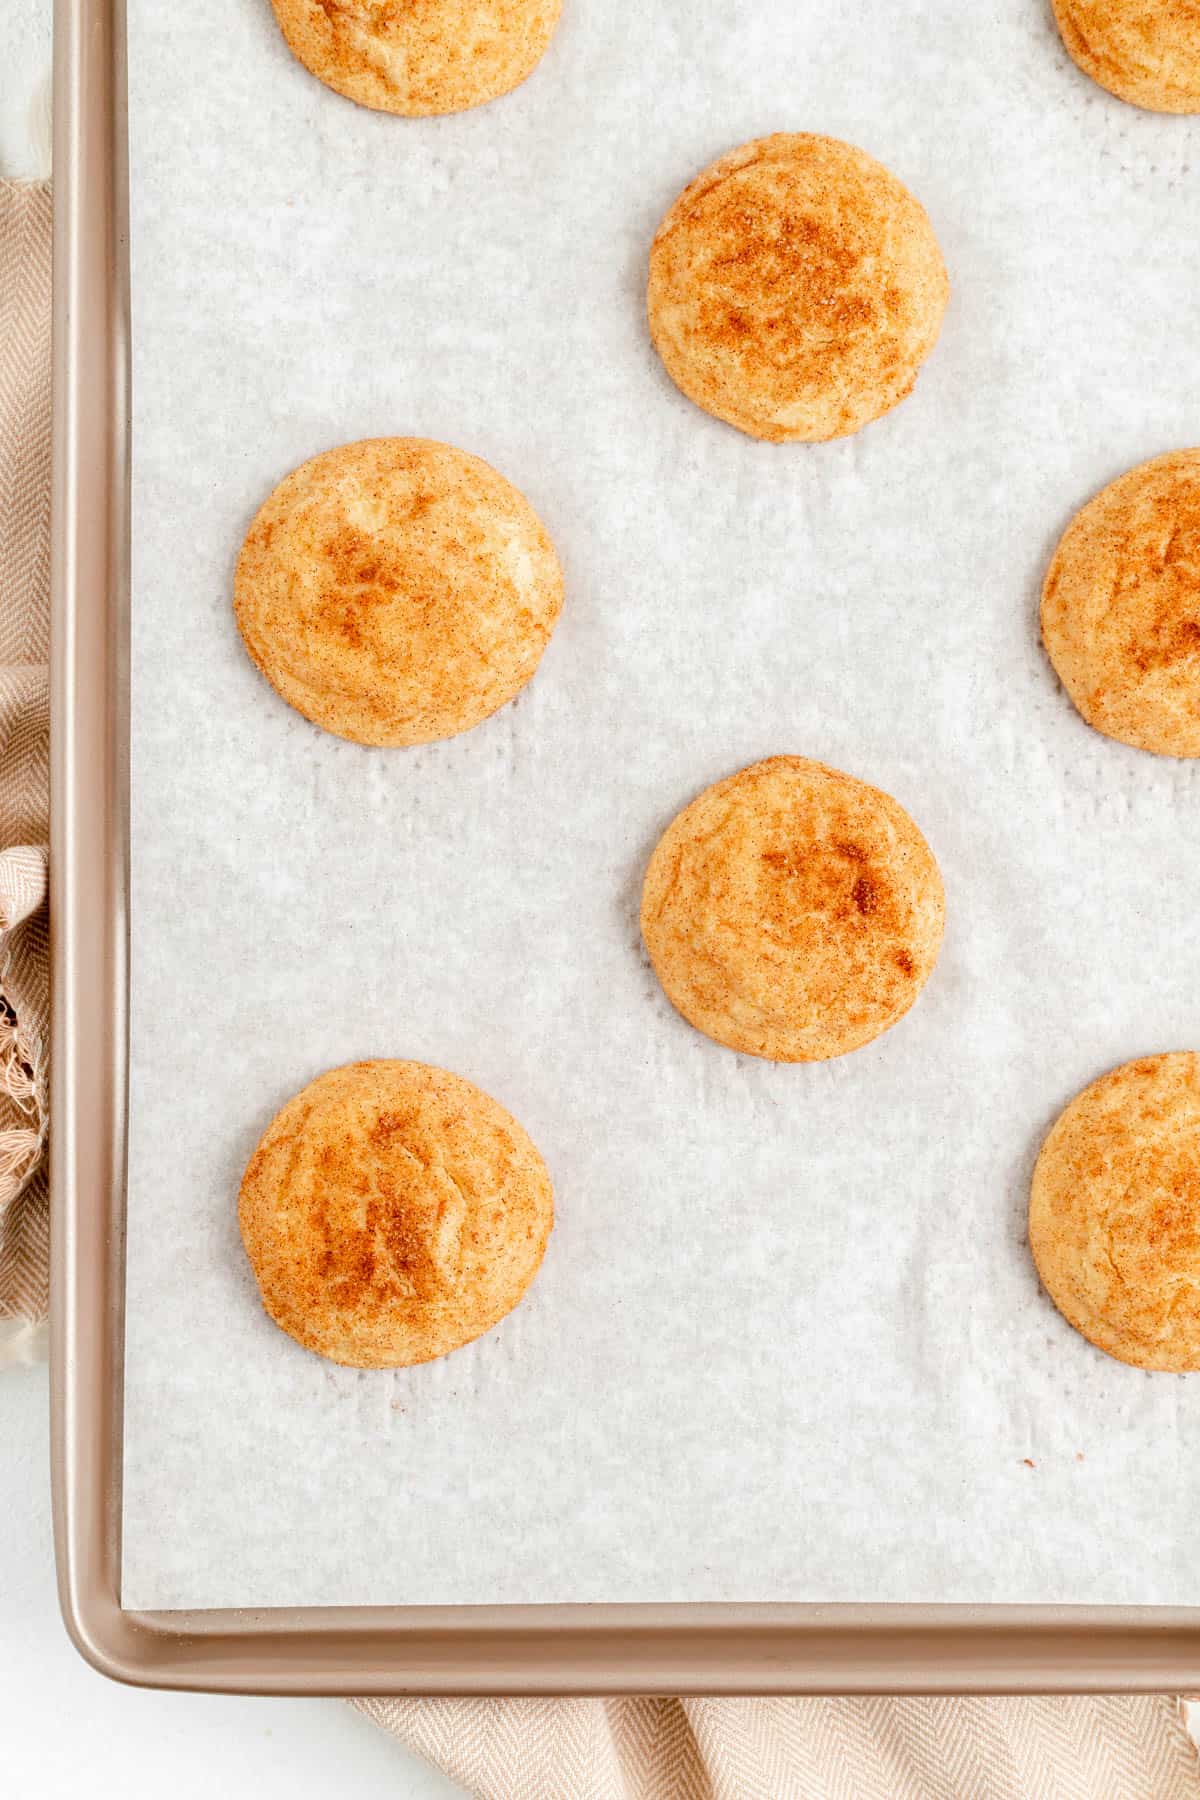 snickerdoodles baked on a parchment lined gold baking sheet.